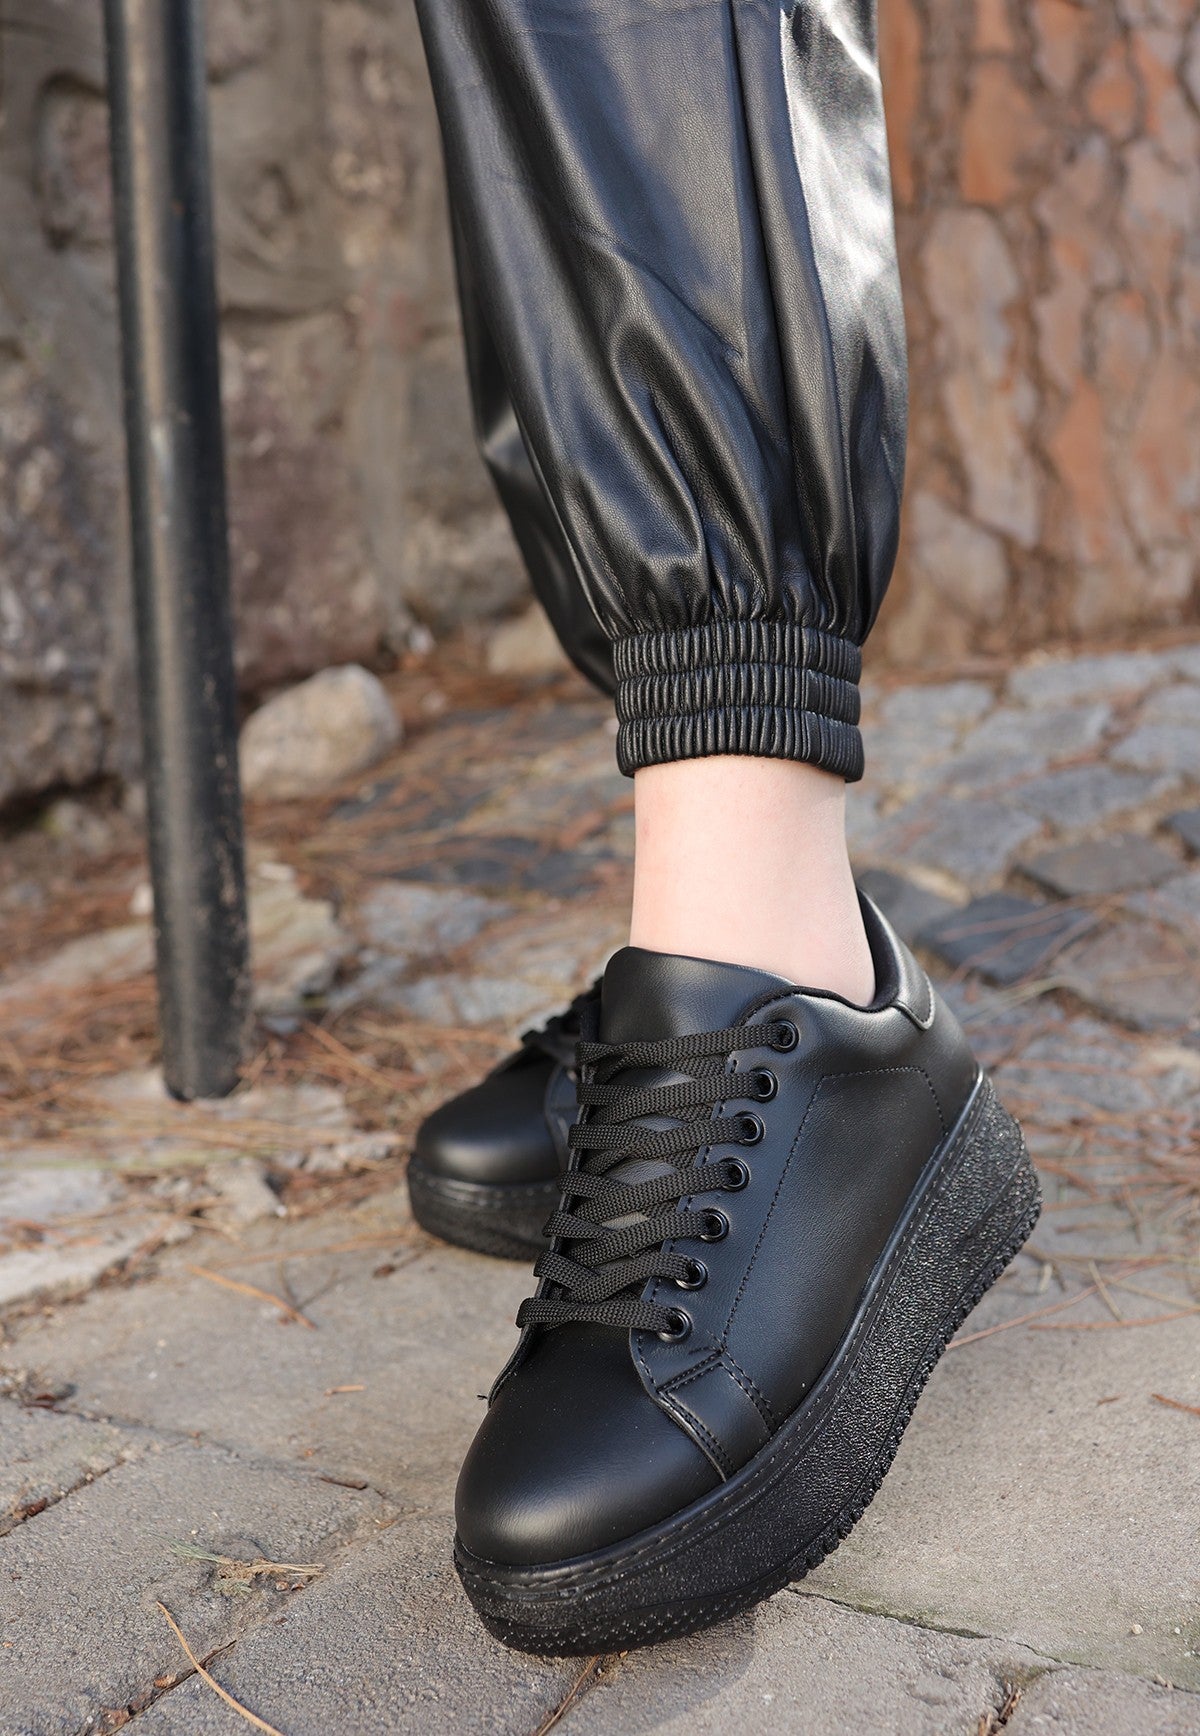 Women's Black Leather Lace-Up Sports Shoes - STREETMODE™